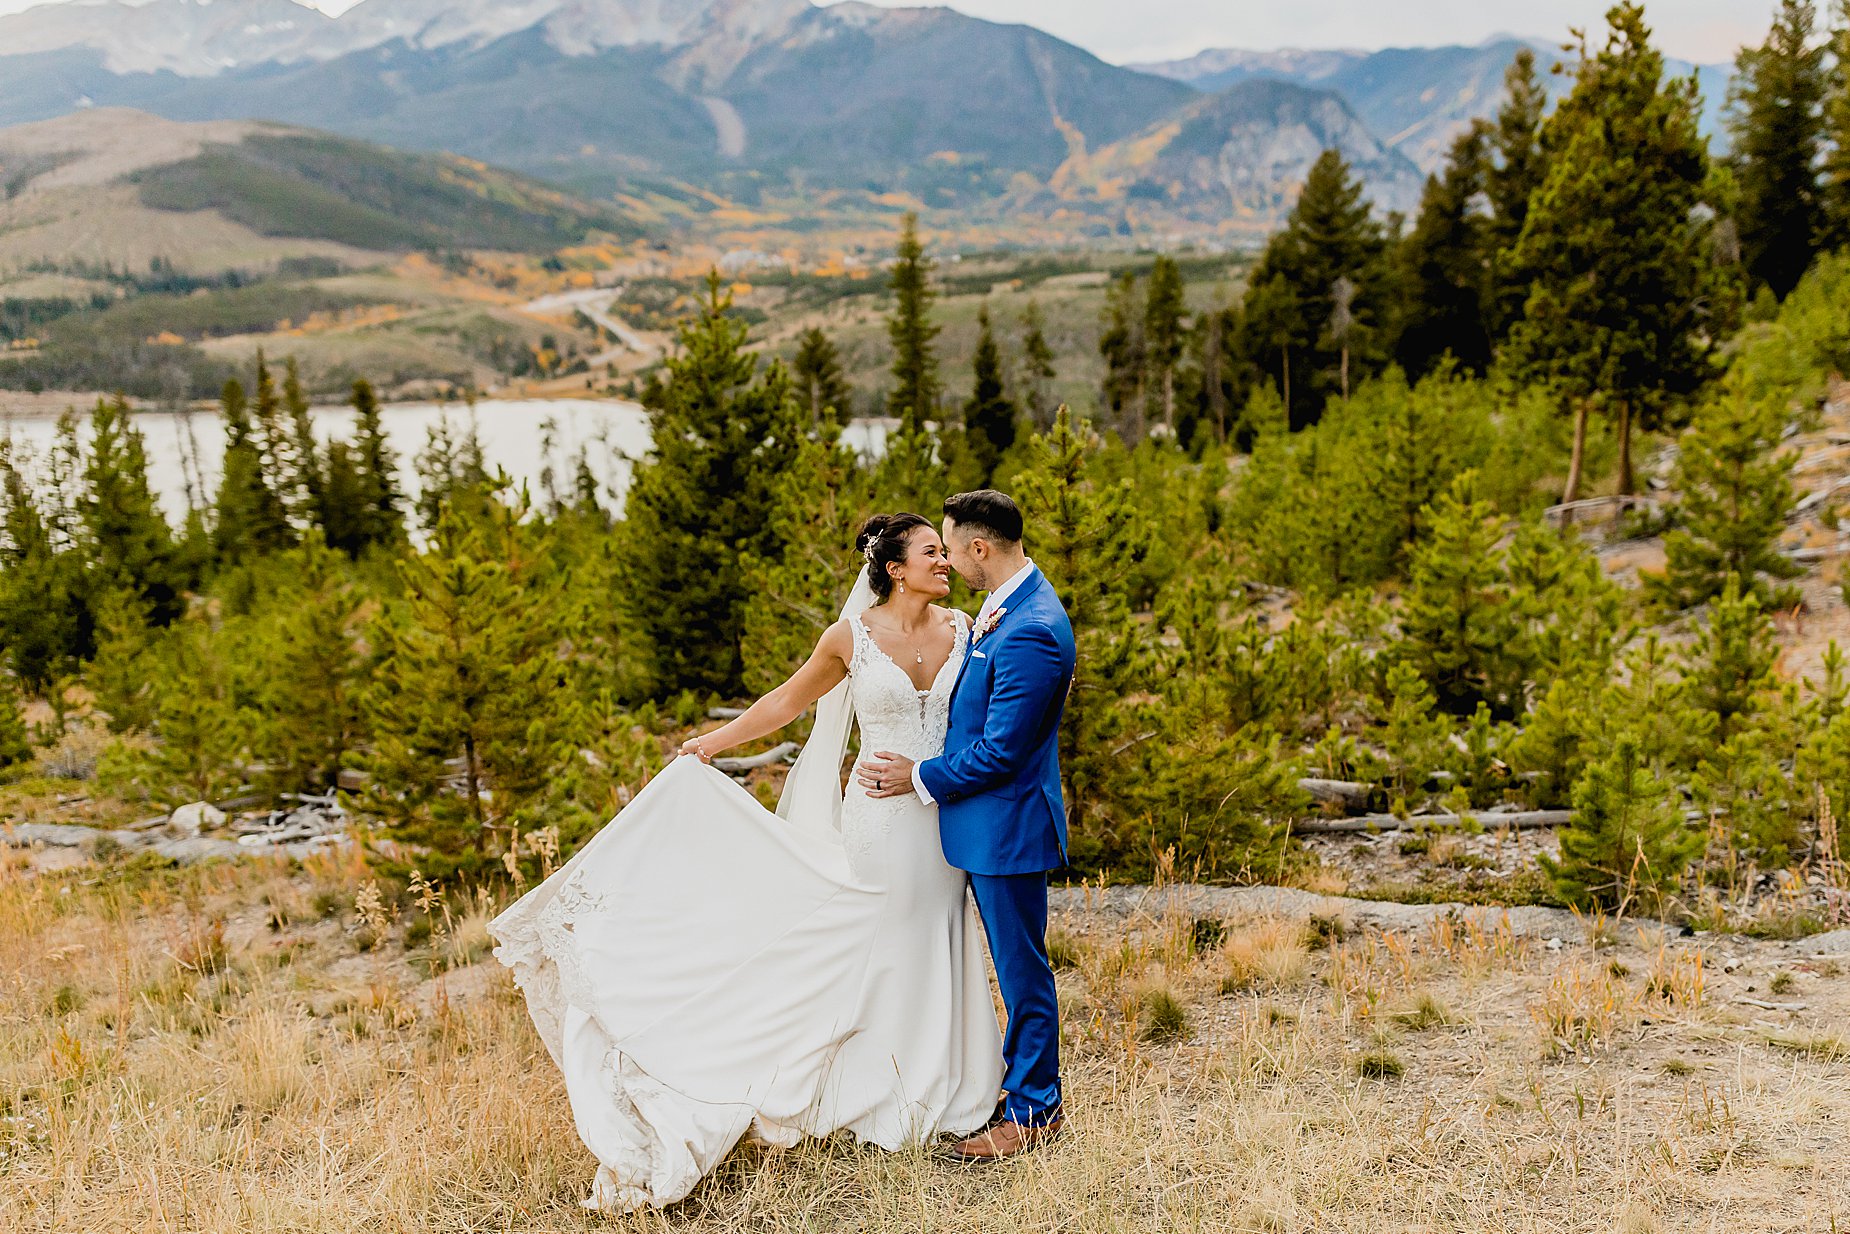 Bride and groom elope in breckenridge colorado with the beautiful mountains and orange aspens in the background, captured by Lauren Casino Photography